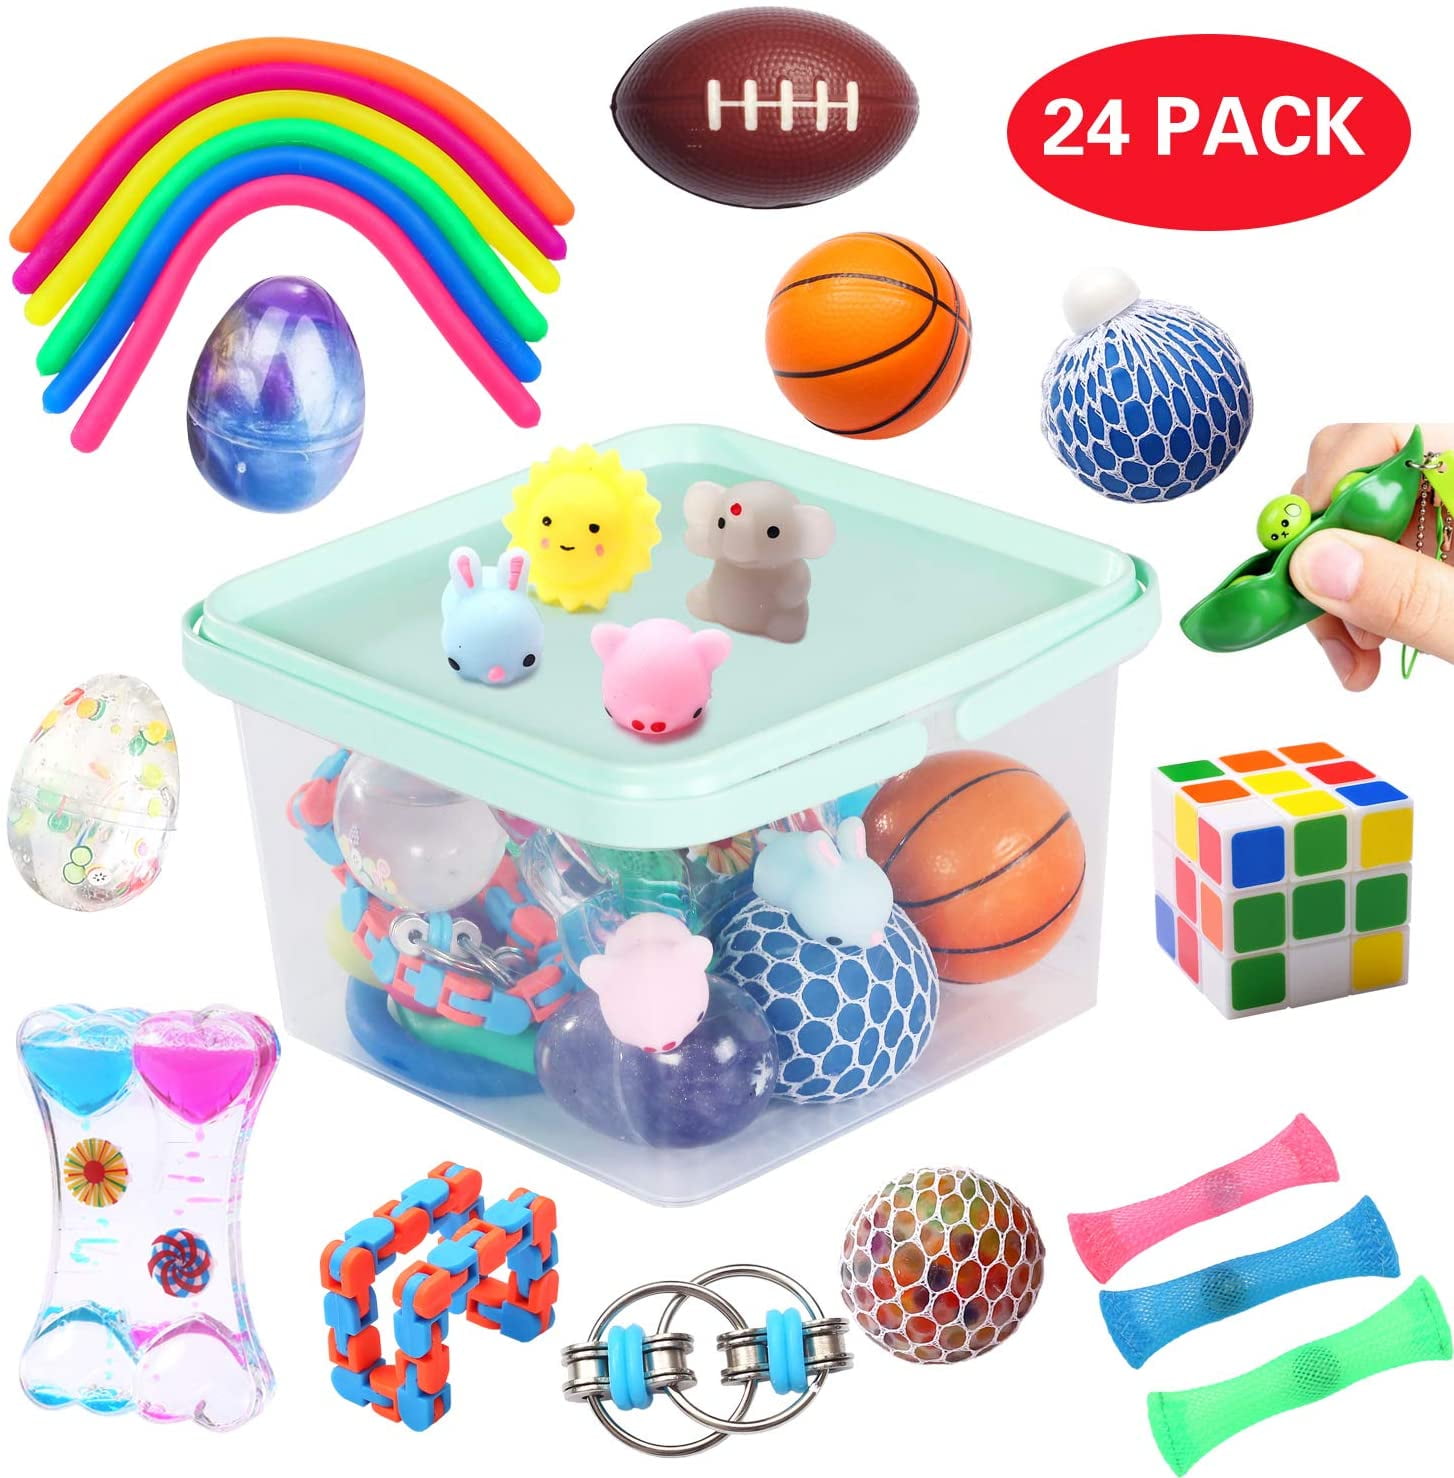 24 Pack Sensory Toys Set Fidget Toys Pack Stress Relief Hand Toys for Adults 